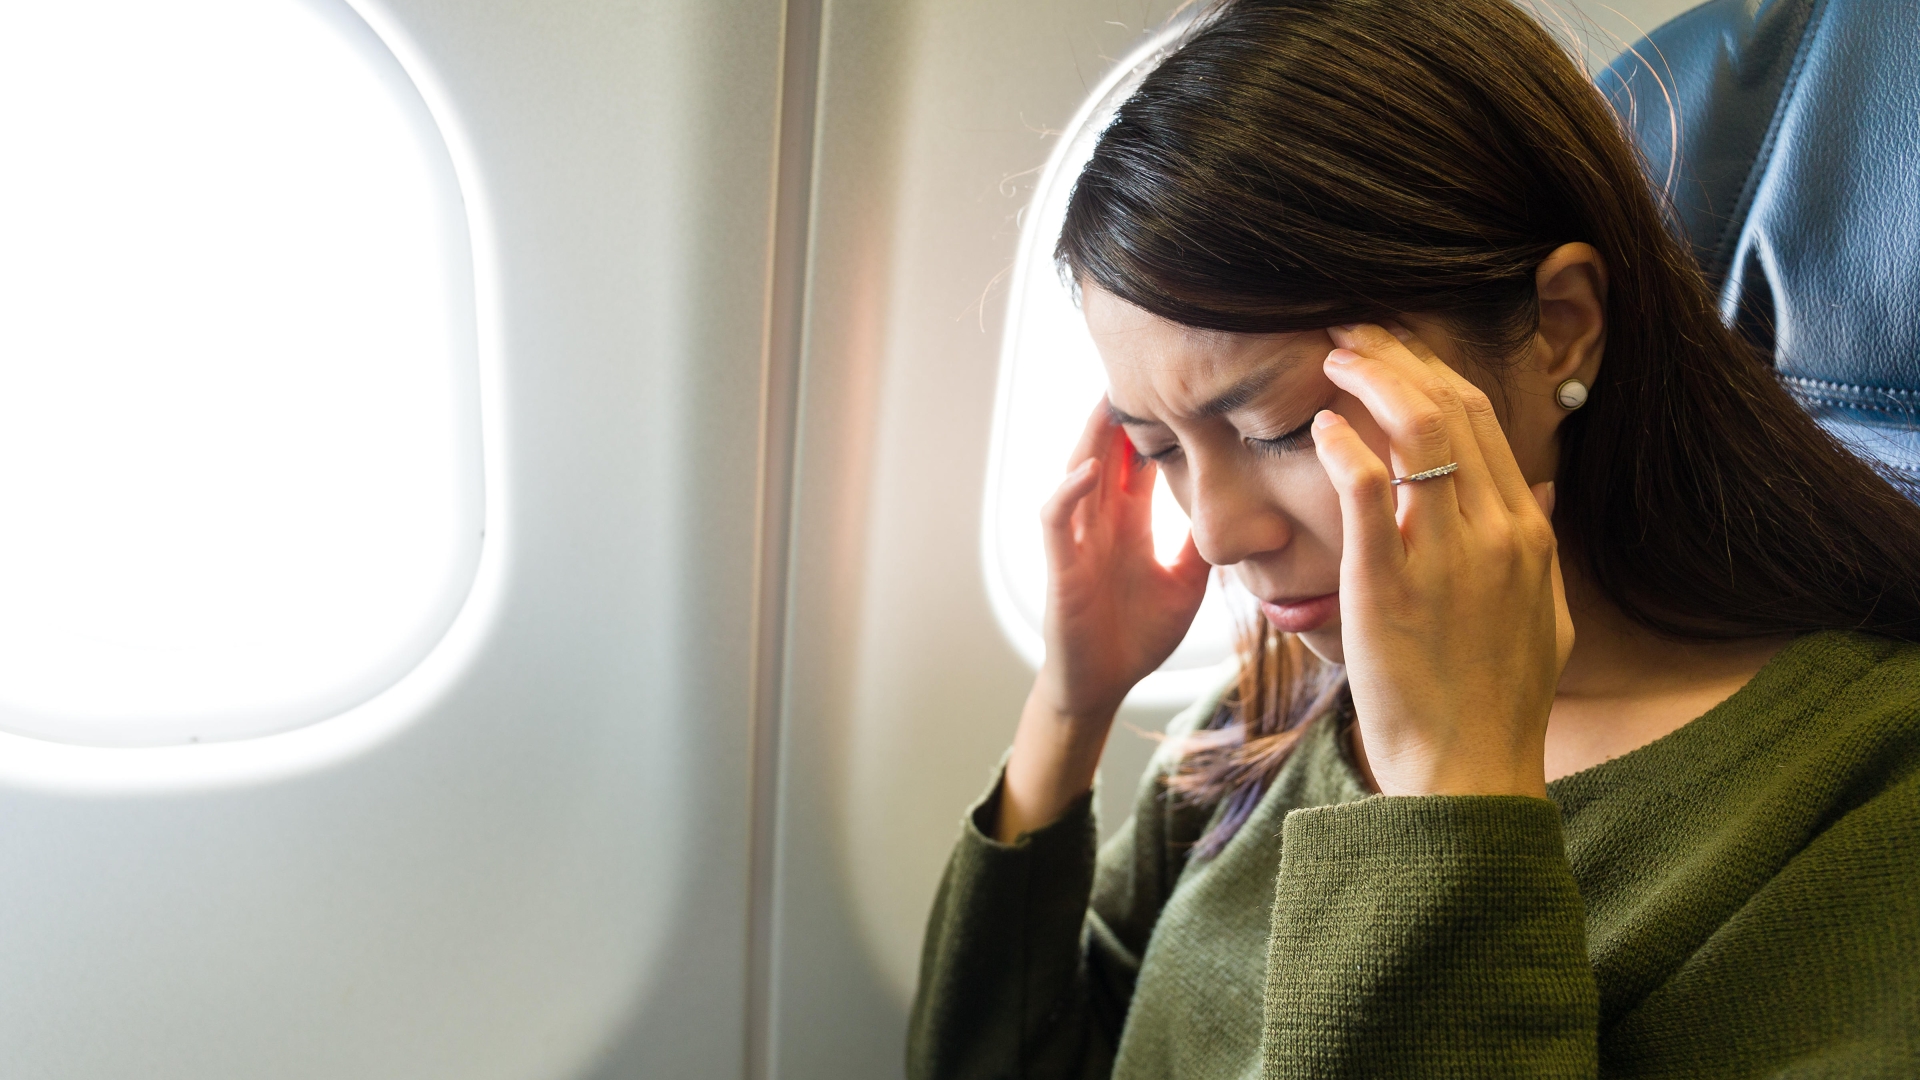 I’m a doctor – here are three big mistakes you’re making when flying that cause neck and back pain